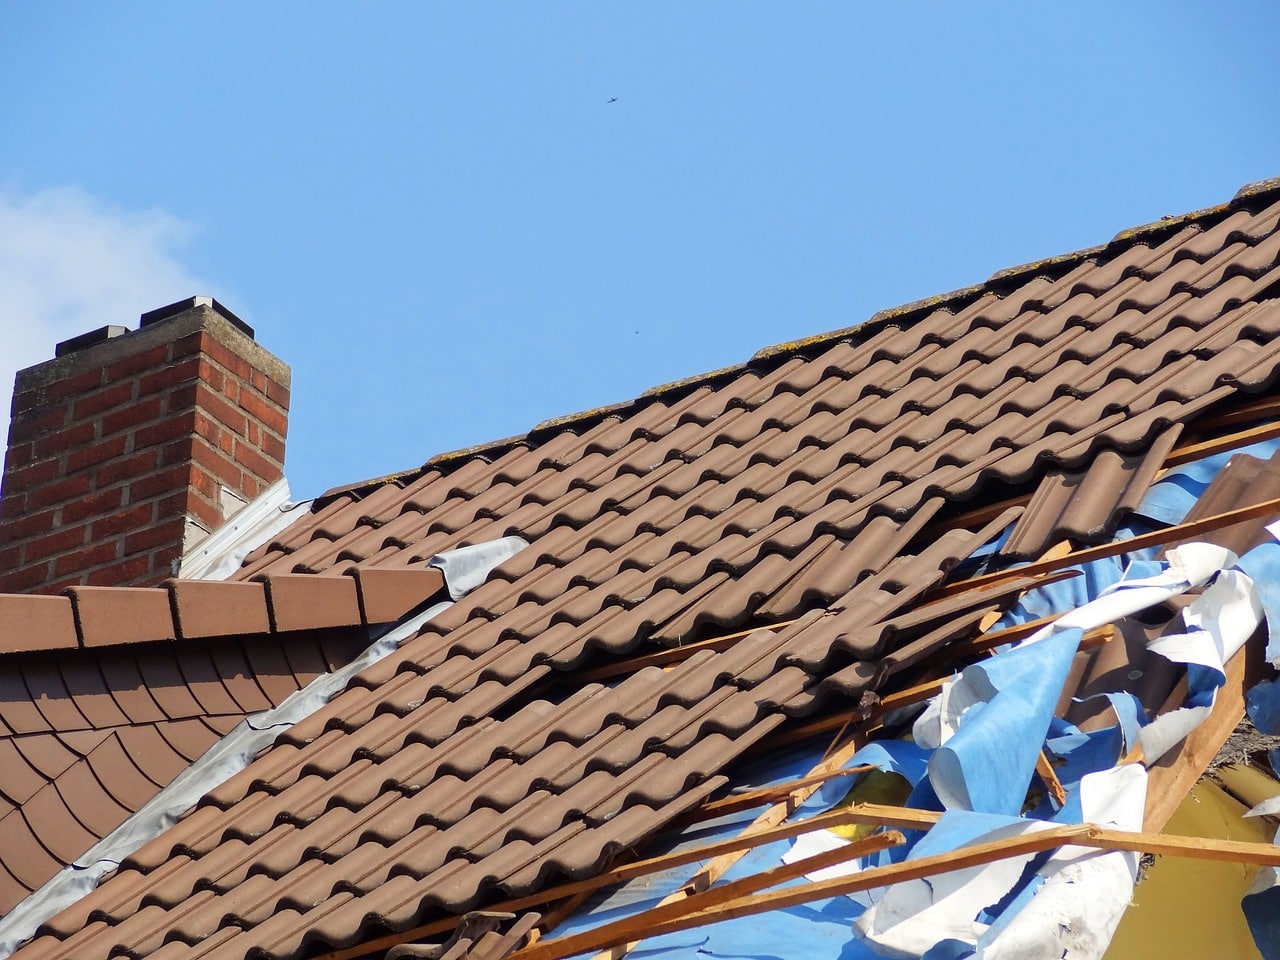 Wind Damage on a Roof: What Does It Look Like And How to Fix It